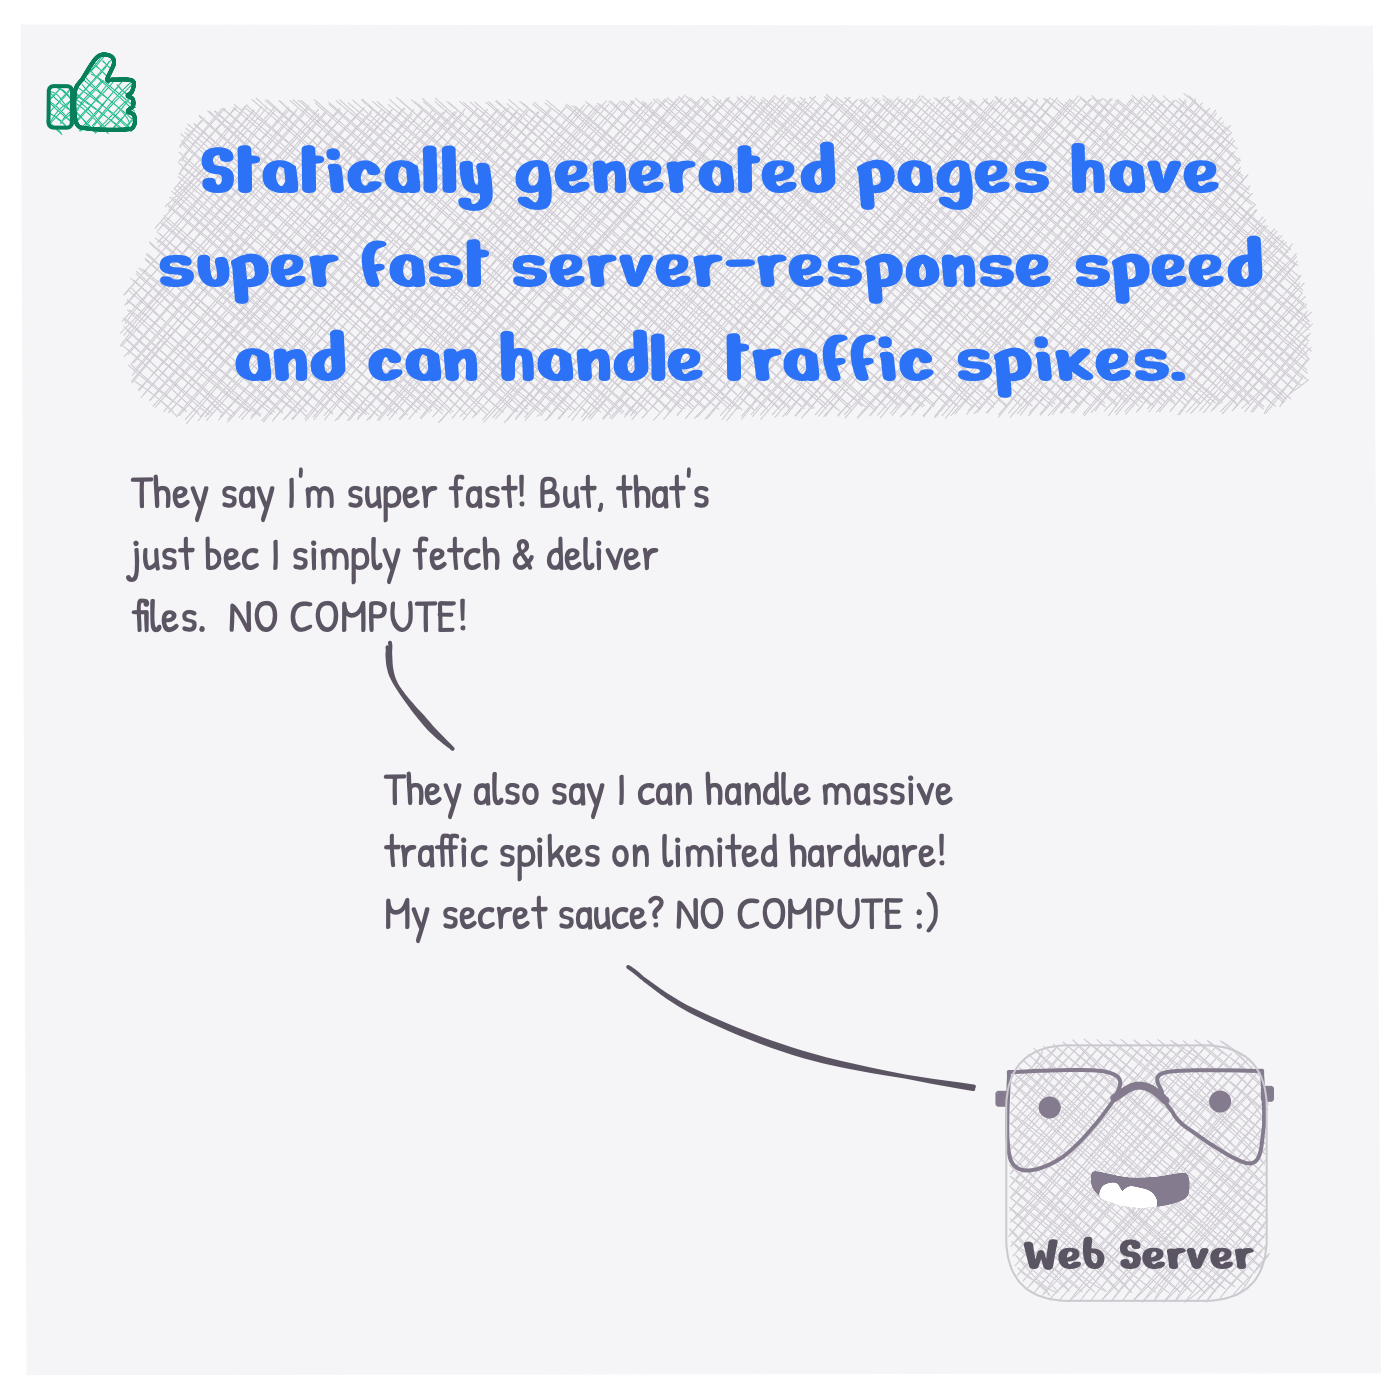 Benefits of statically generated sites